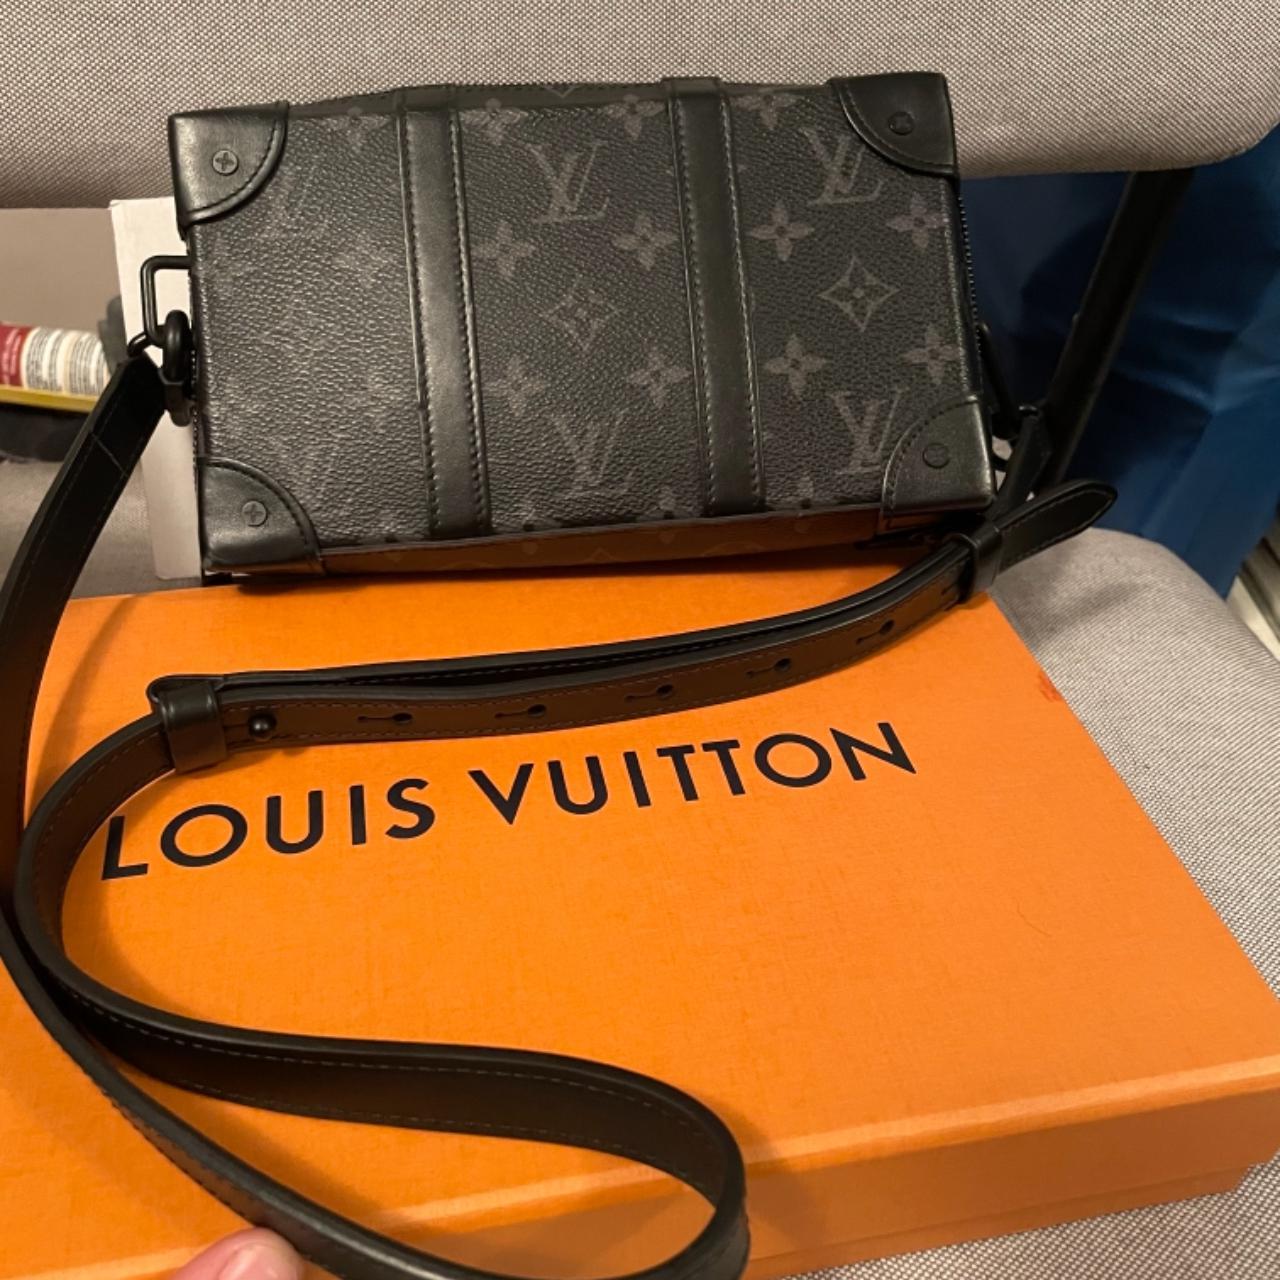 Selling LV soft trunk wallet, only used a handful of - Depop